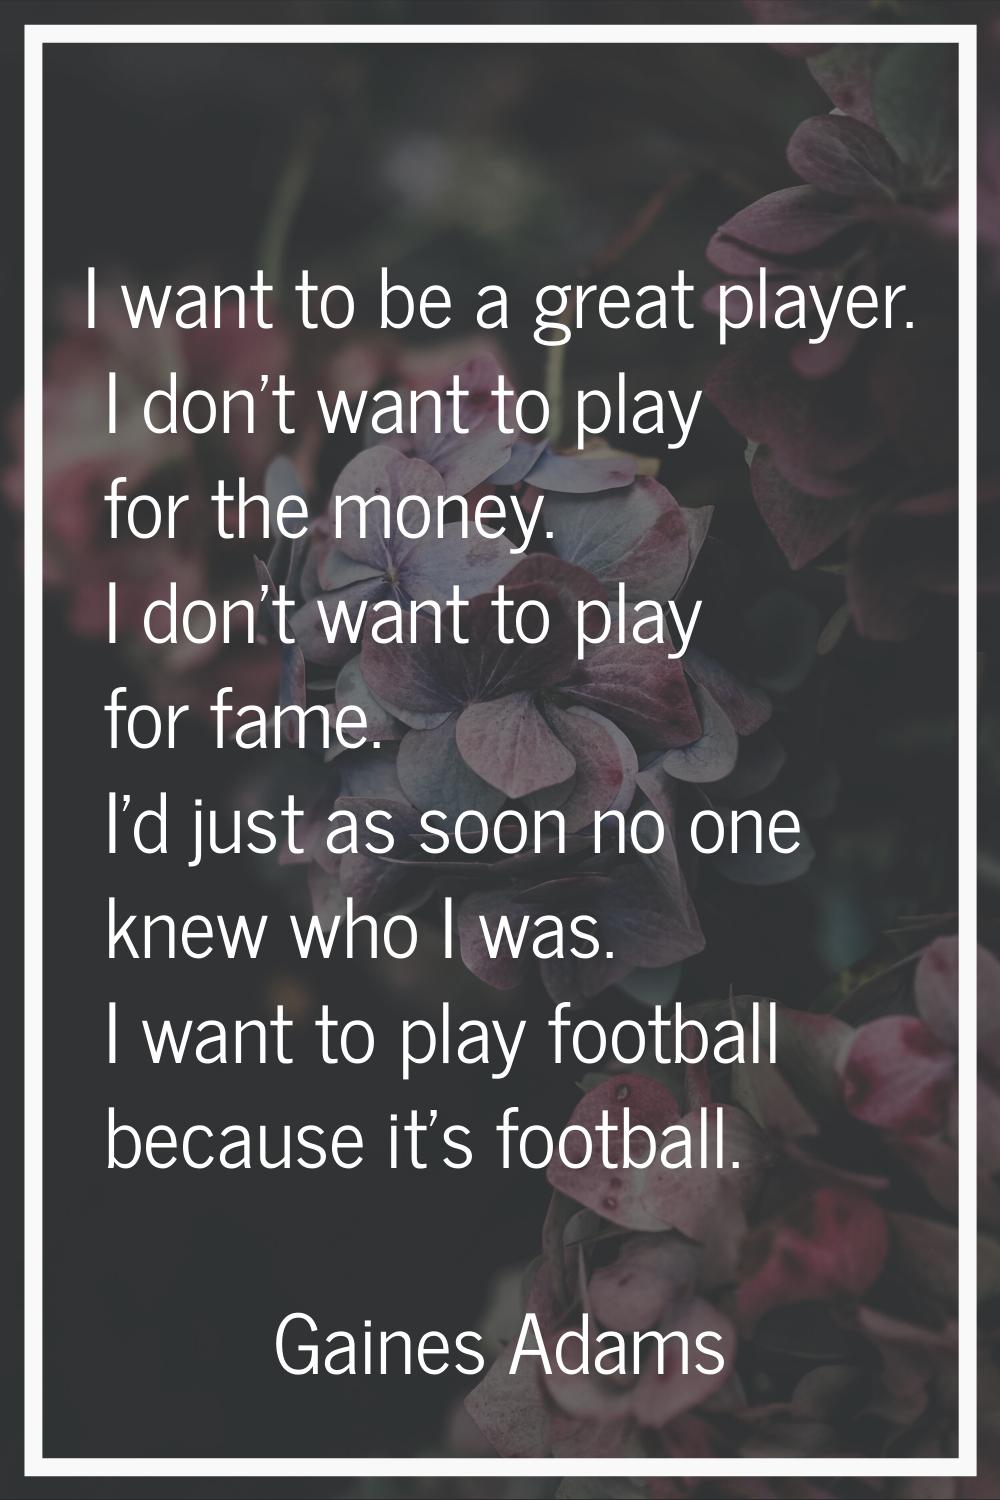 I want to be a great player. I don't want to play for the money. I don't want to play for fame. I'd